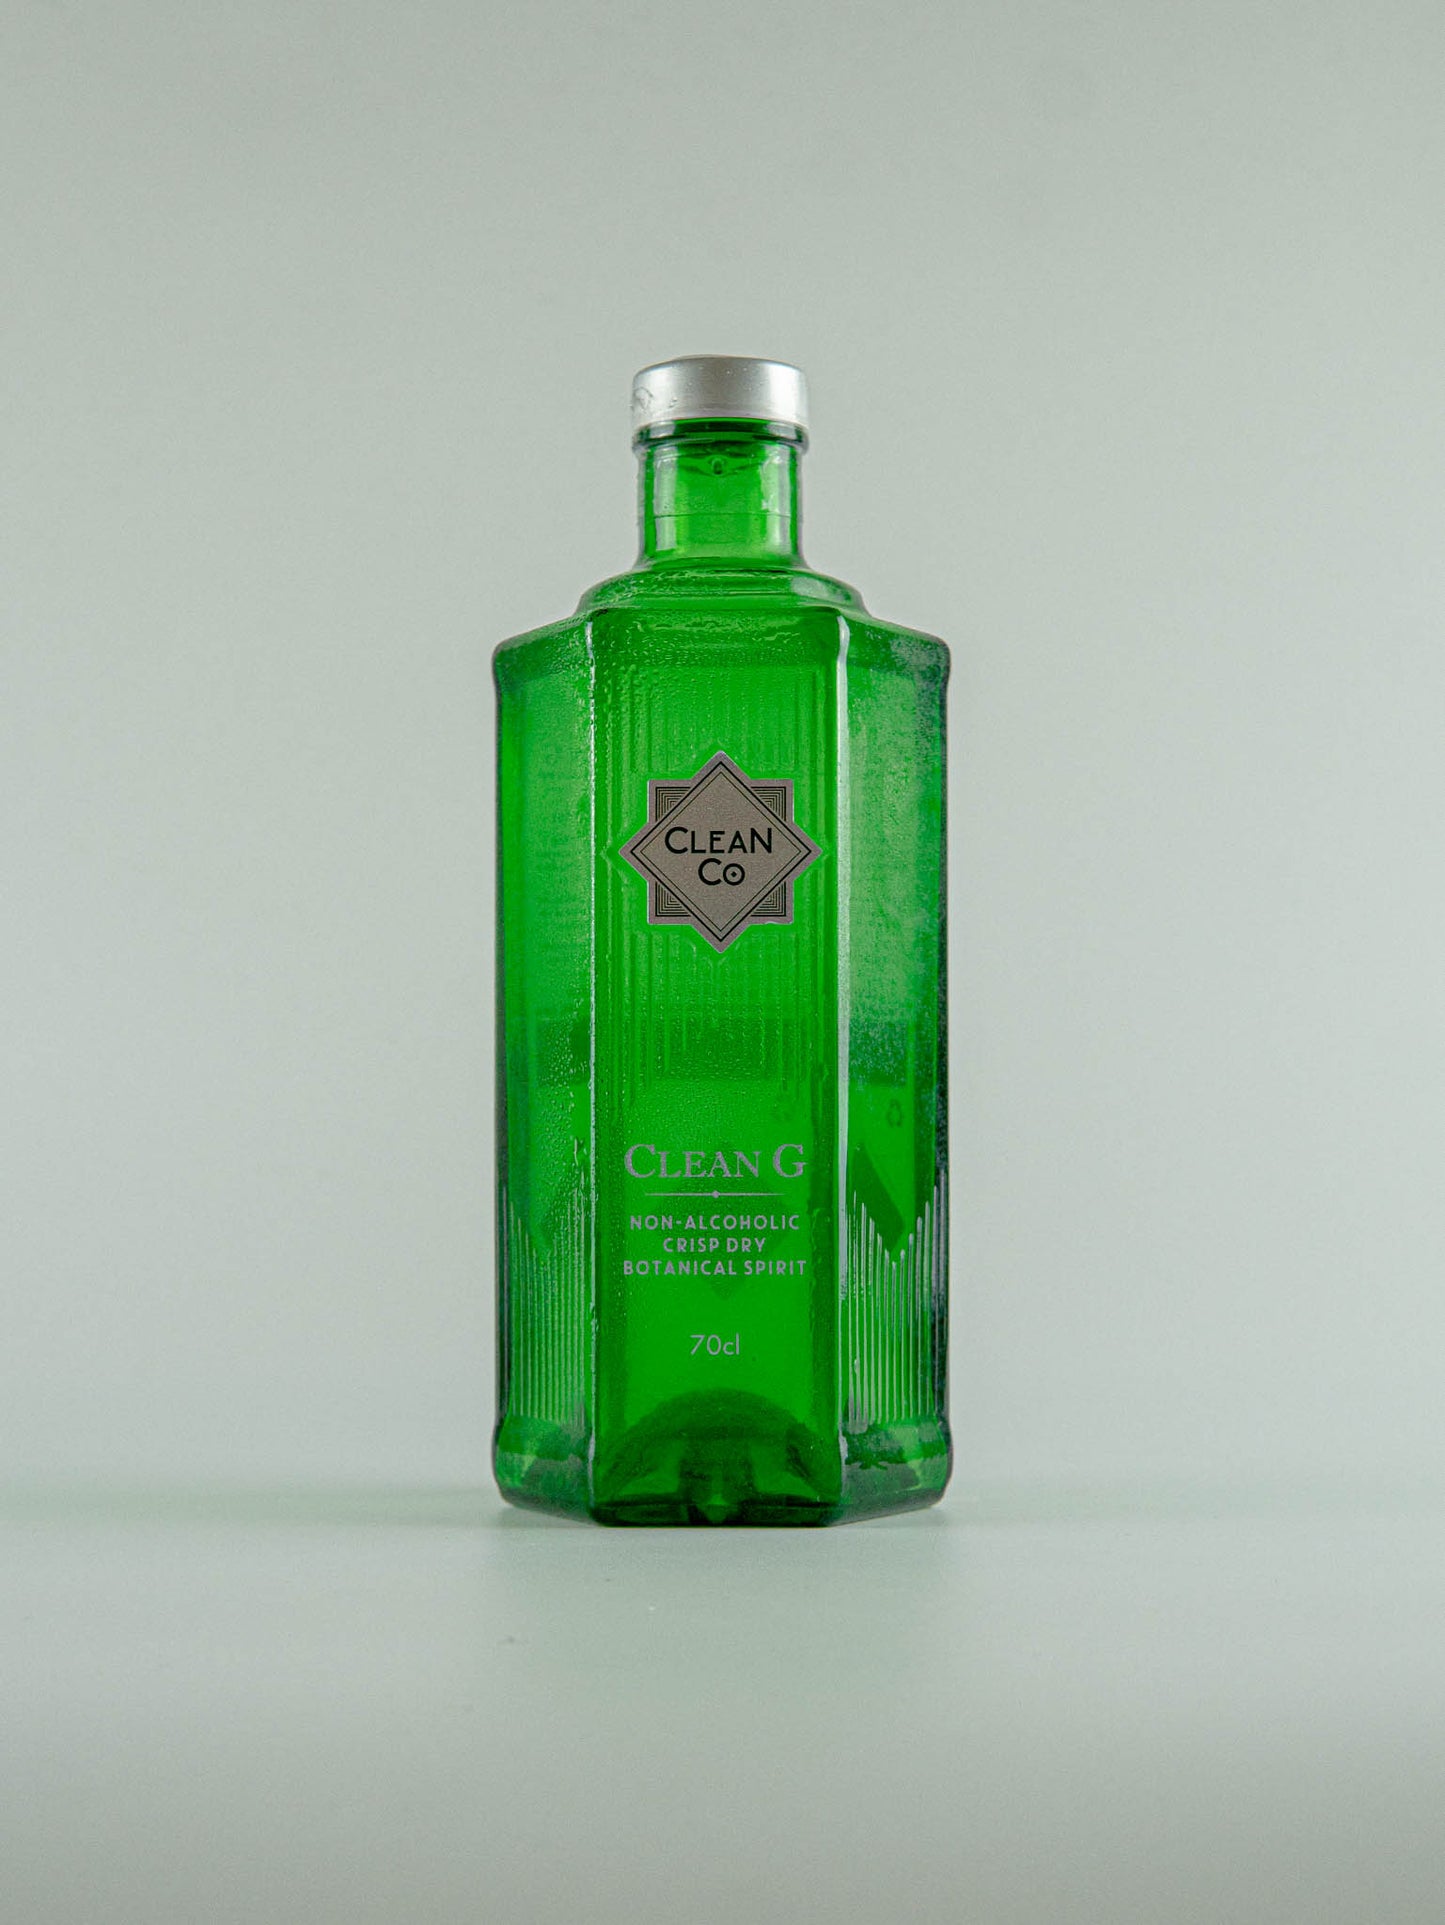 CleanCo Clean G Gin Non Alcoholic 0.4% - 700ml